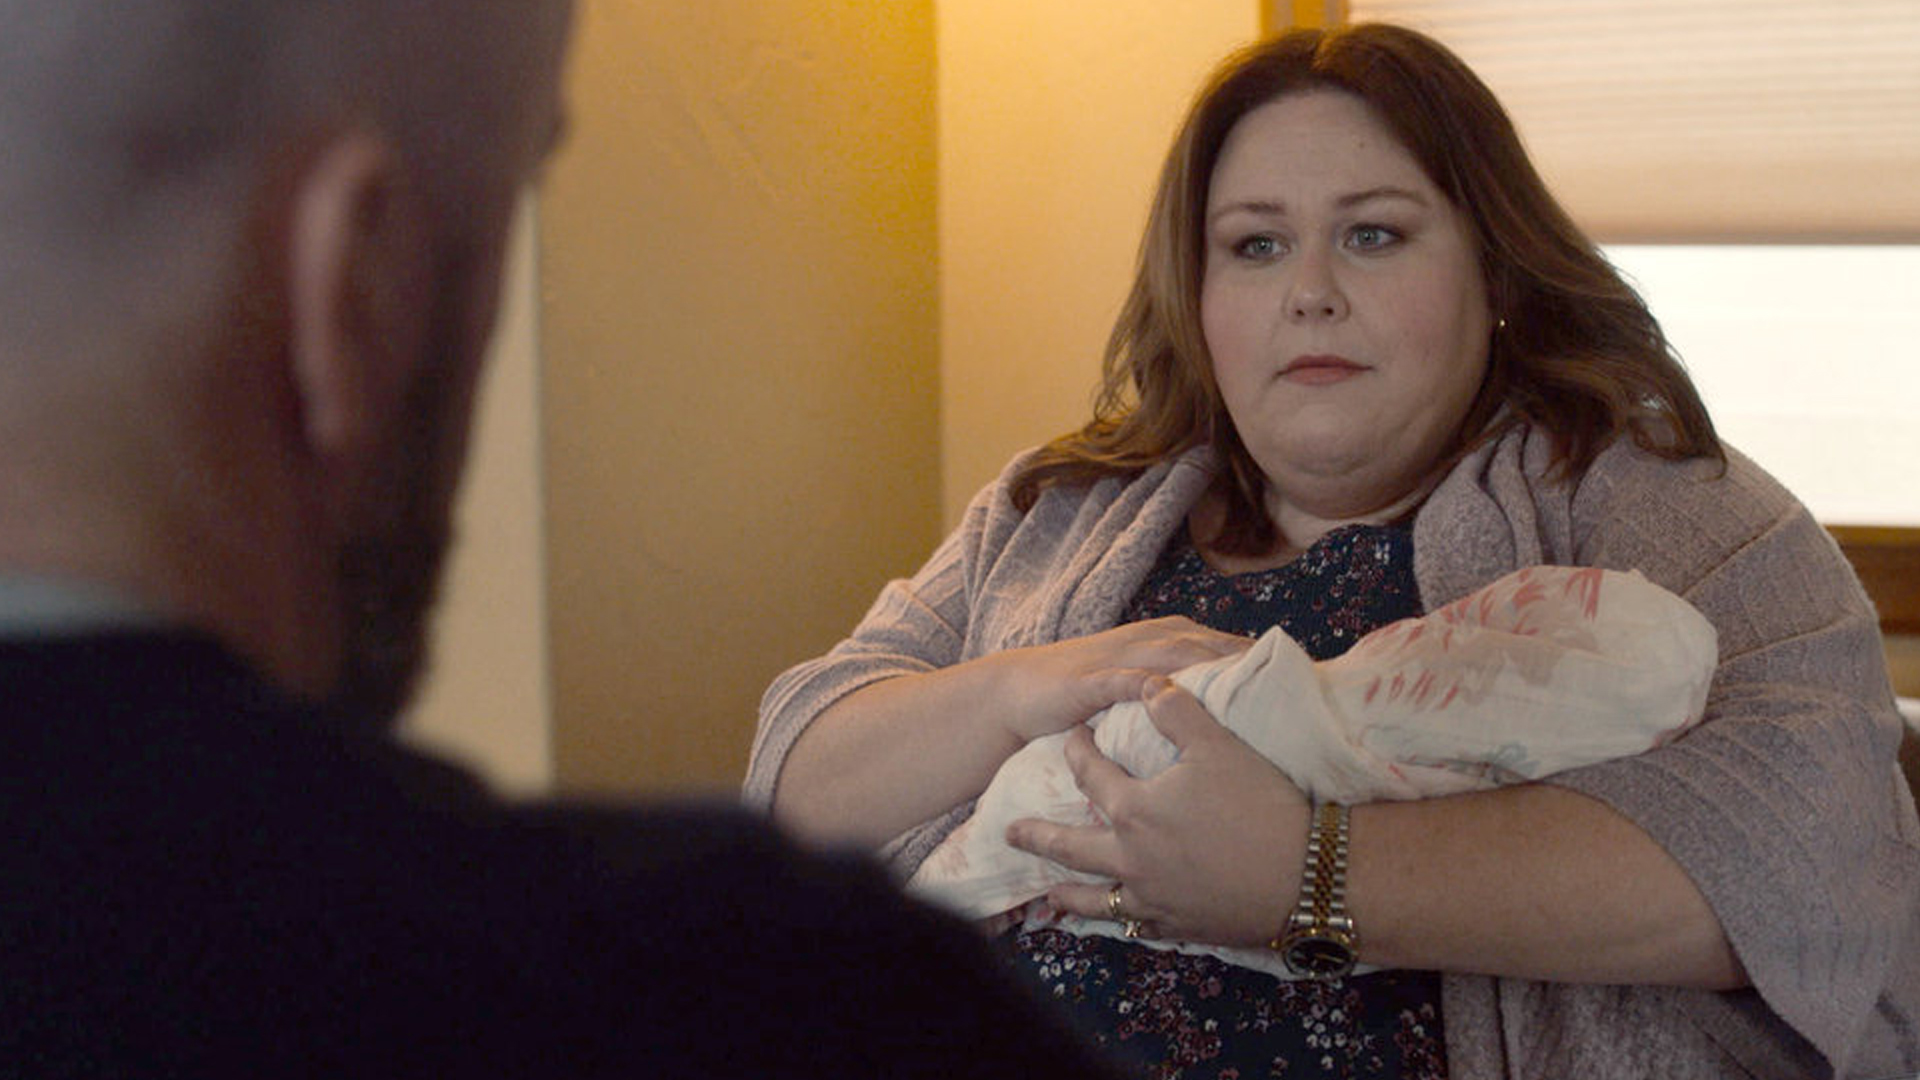 Chris Sullivan as Toby and Chrissy Metz as Kate holding baby Hailey Rose Damon in ‘This Is Us’ Season 5 Episode 9, “The Ride.”